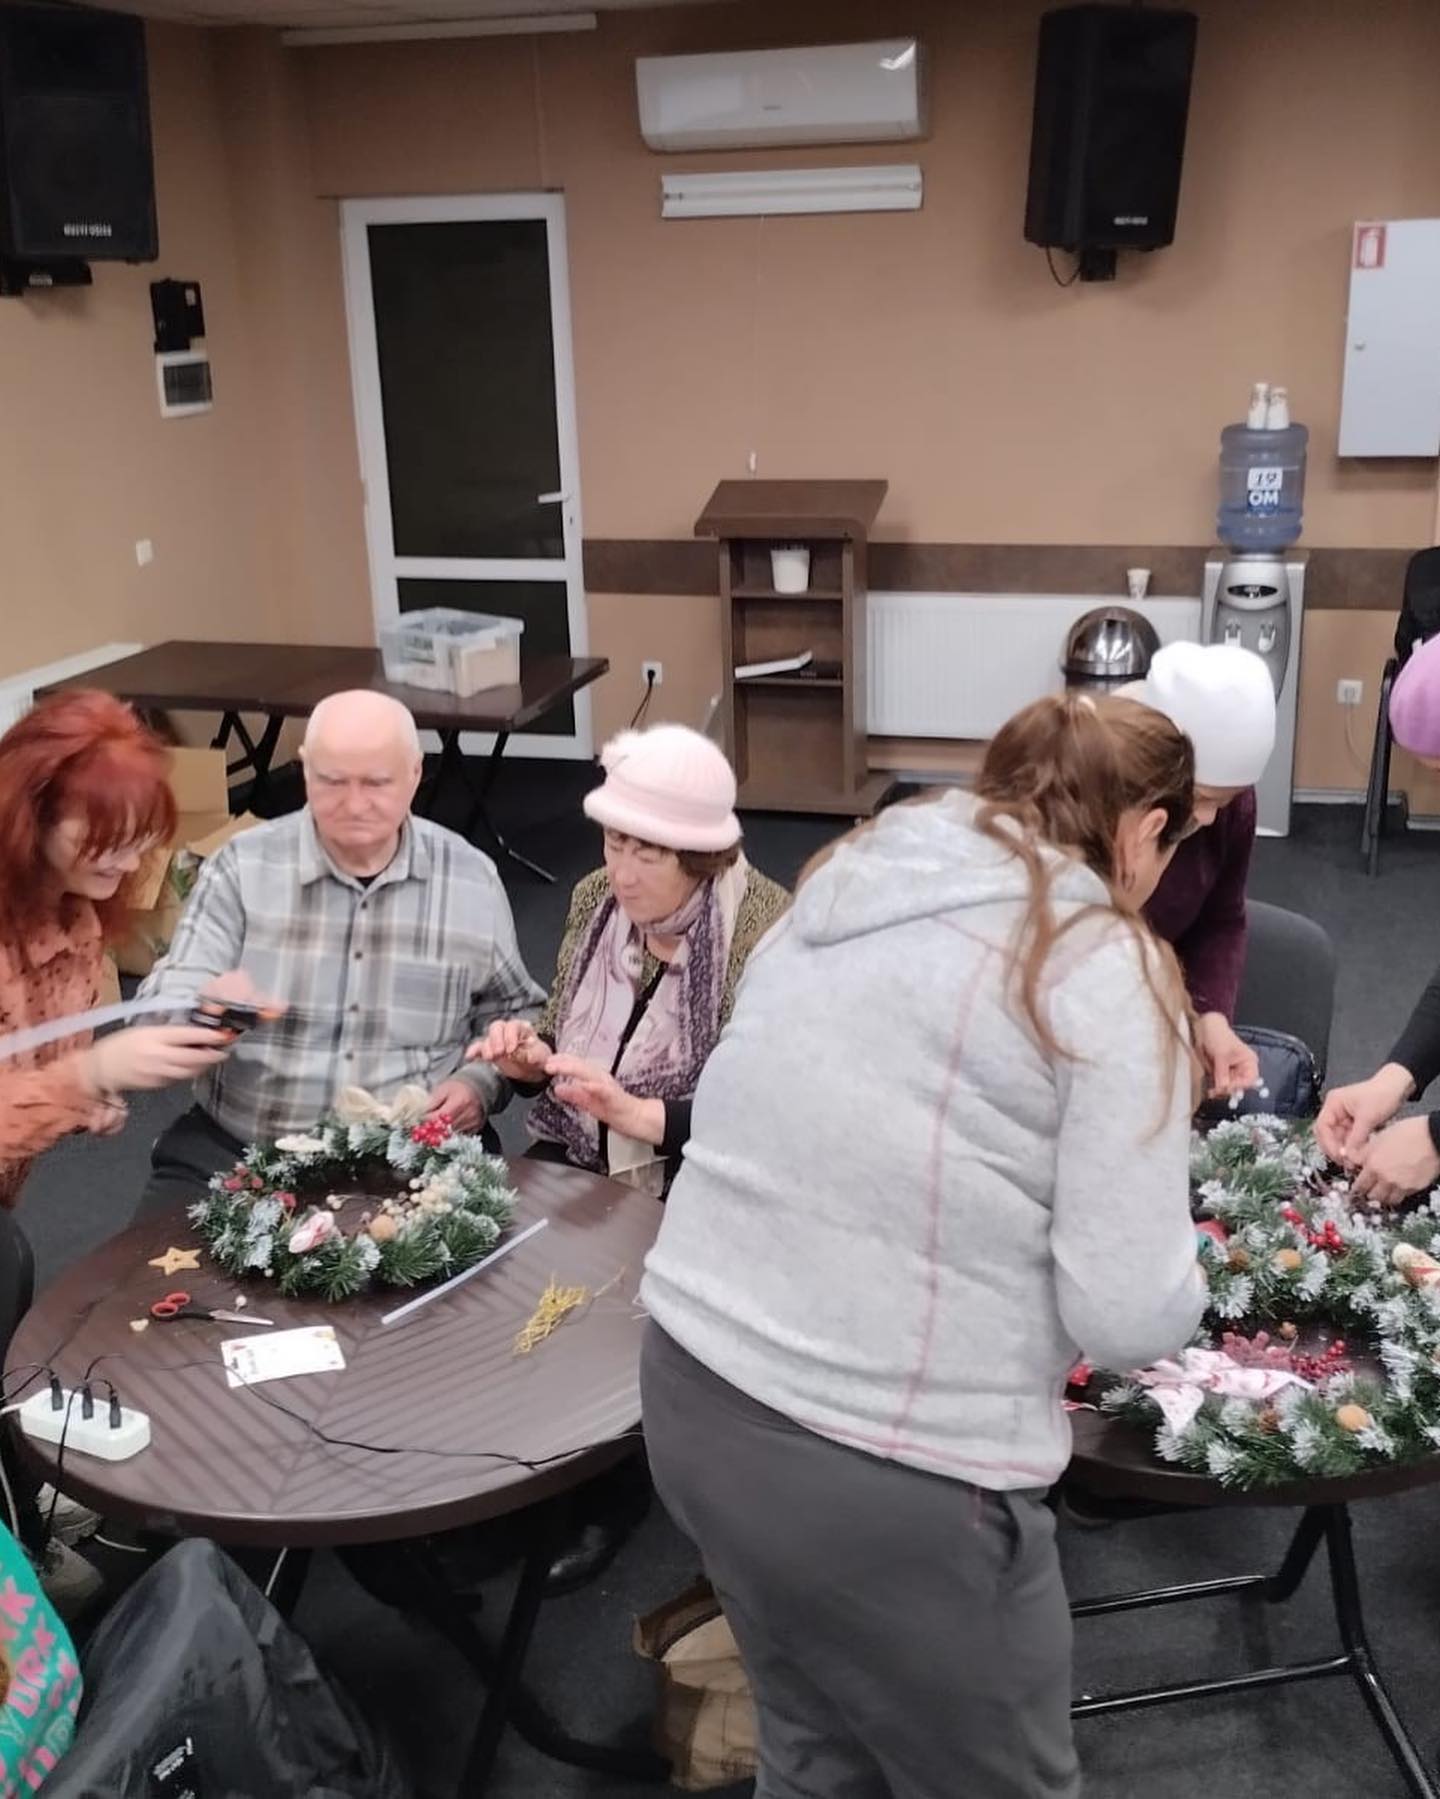 In December, ADRA Moldova organised a workshop meeting aimed at social inclusion and friendship with refugees from Ukraine. Using Art Therapy refugees created holiday decorations.